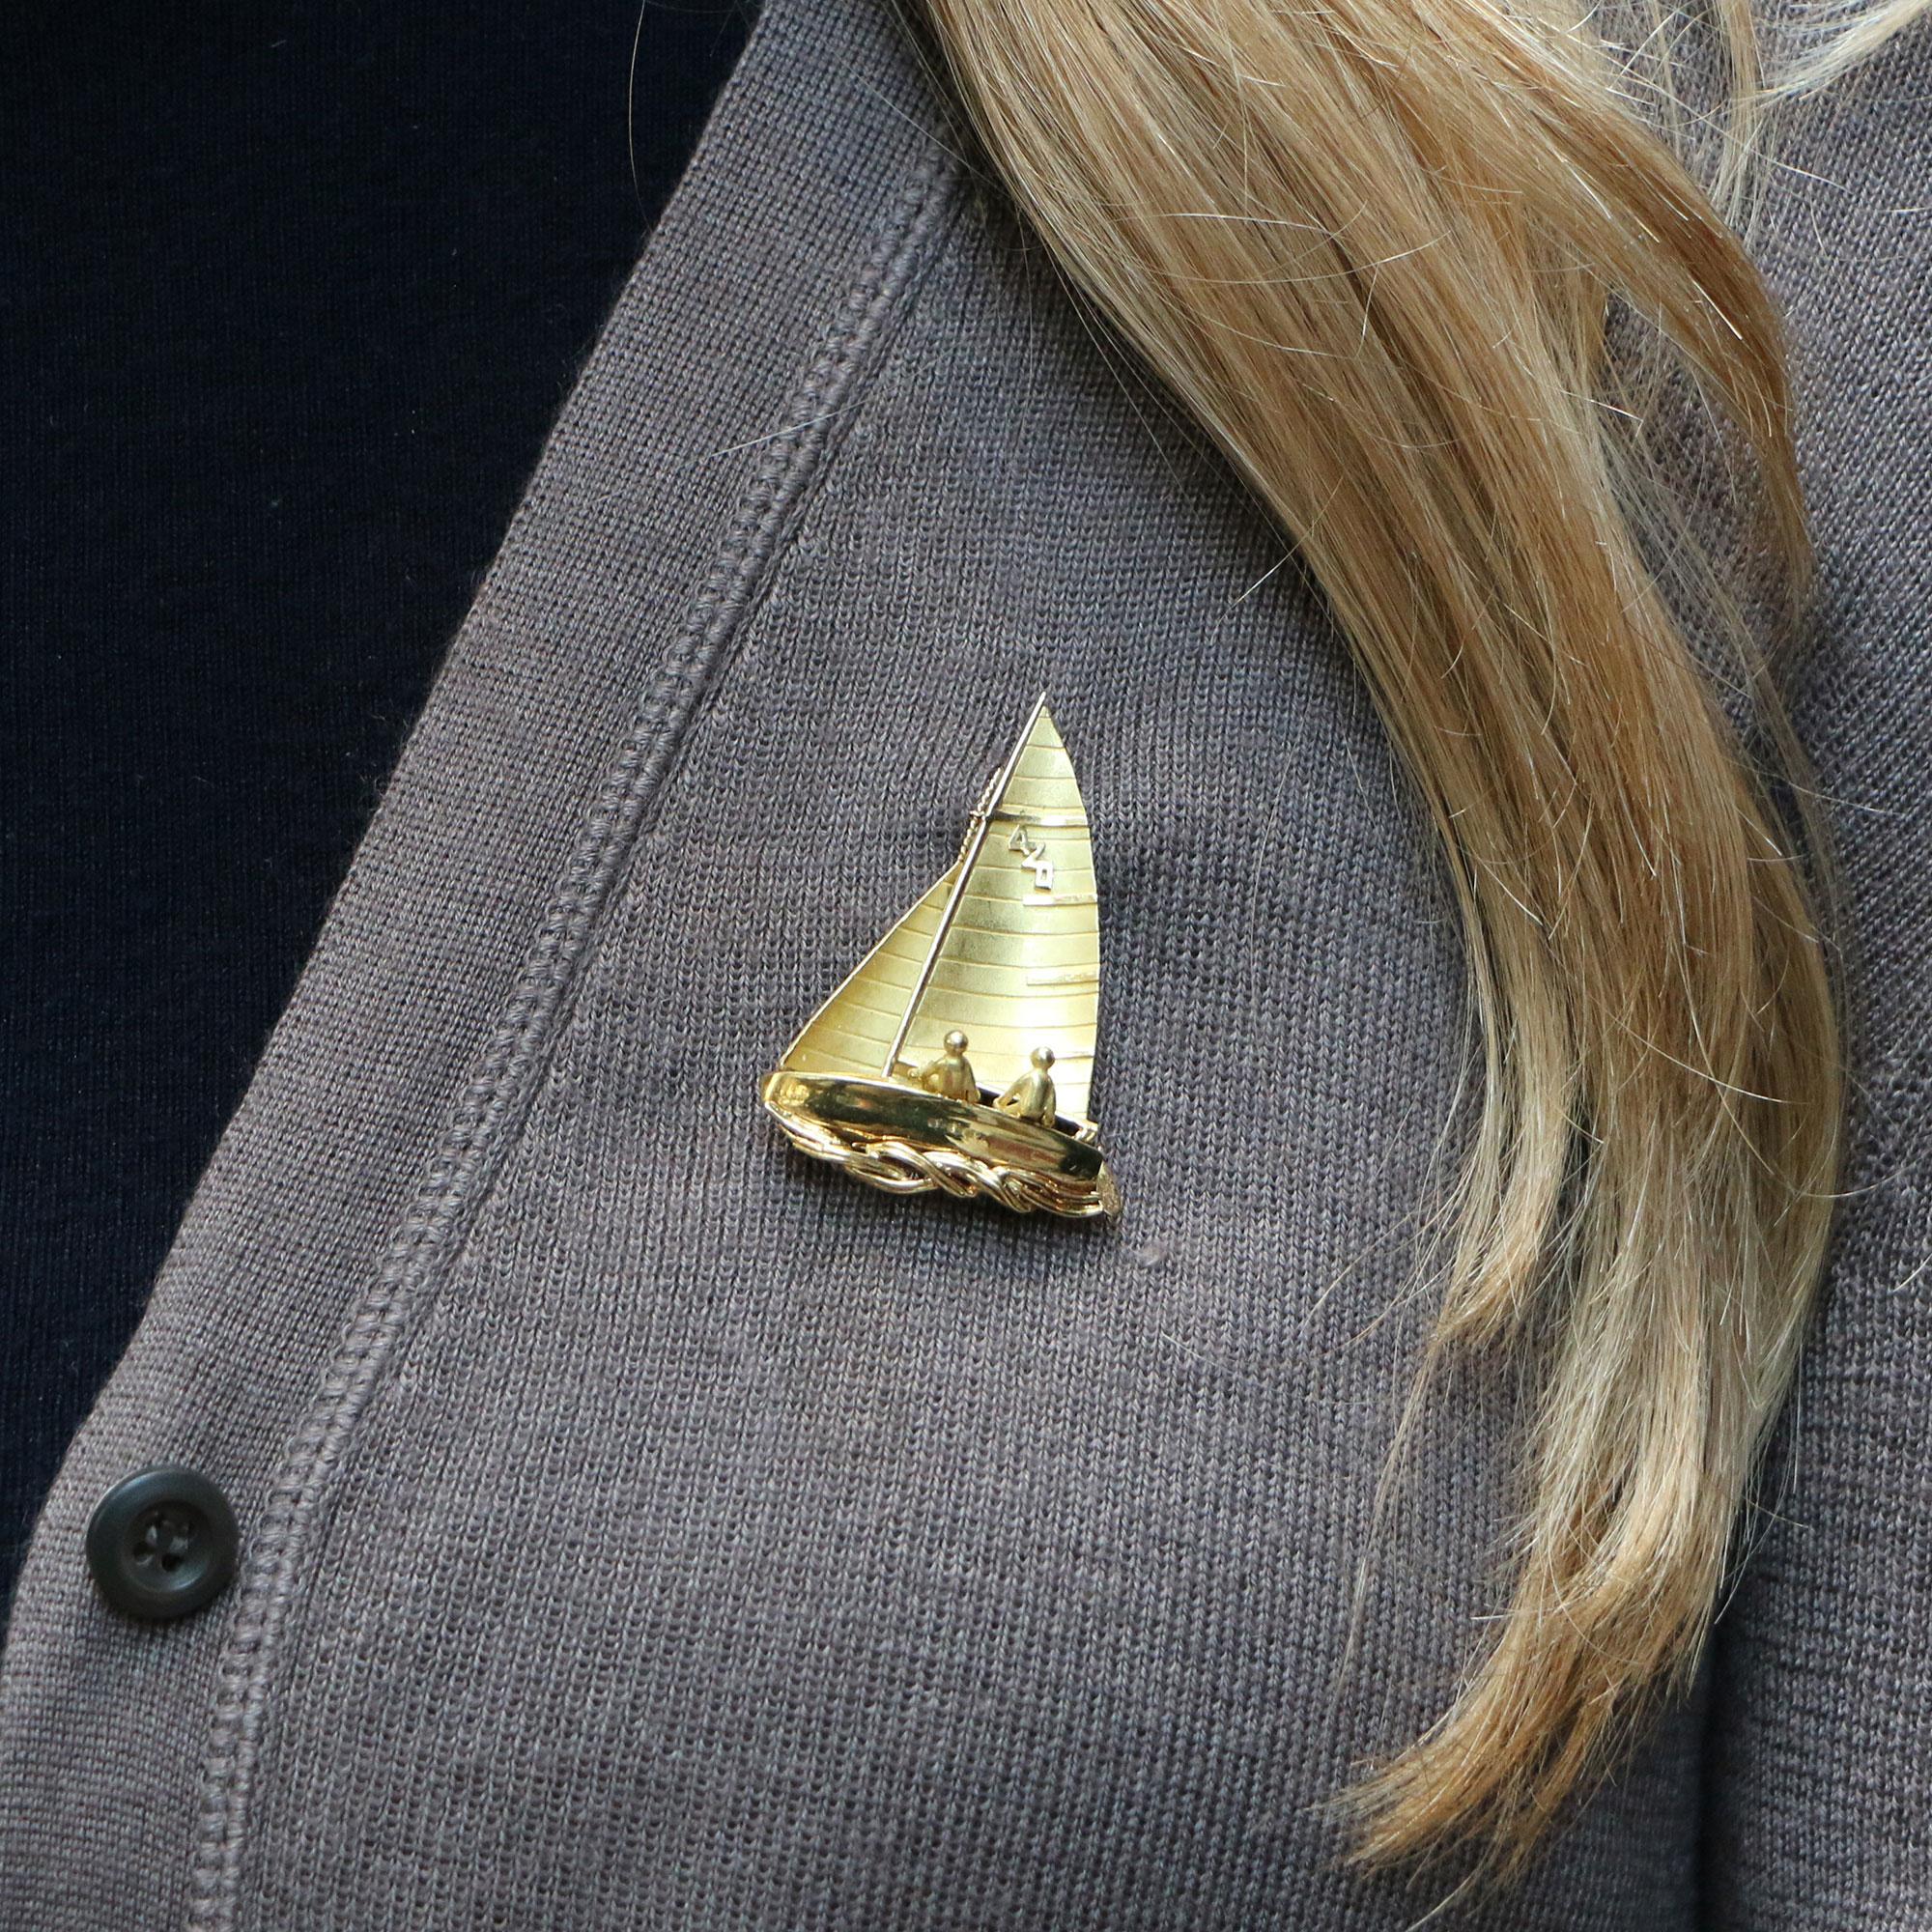 A beautifully detailed yellow gold sailing boat/yacht brooch made of solid 18k yellow gold. The brooch depicts a boat at full speed on the open ocean complete with two crew on board. 

The polished and brushed gold sections give this piece even more